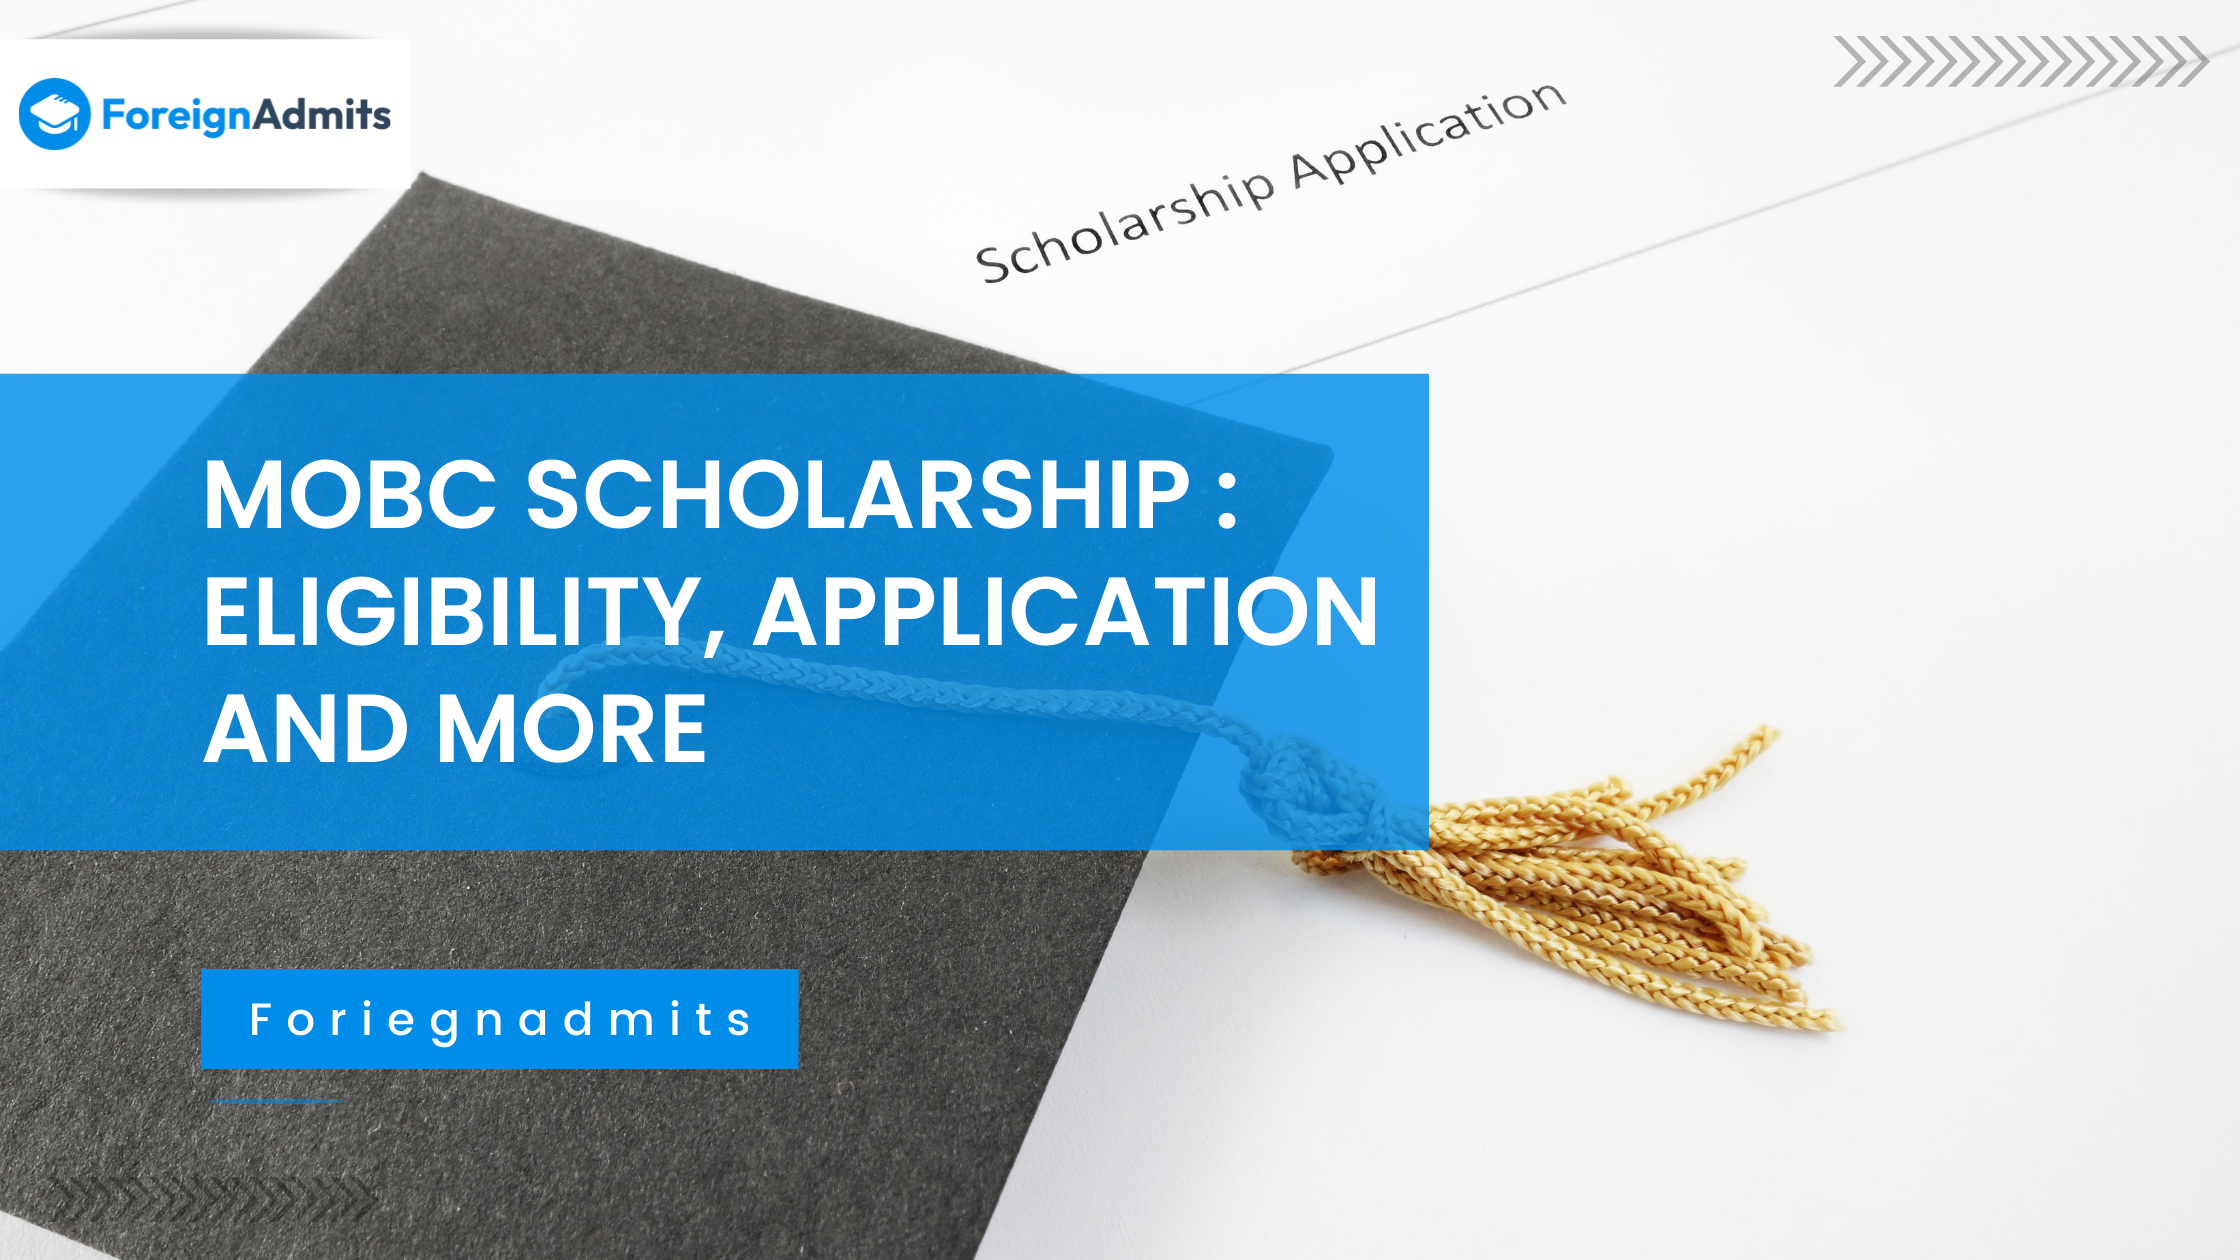 MOBC Scholarship : Eligibility, Application And More